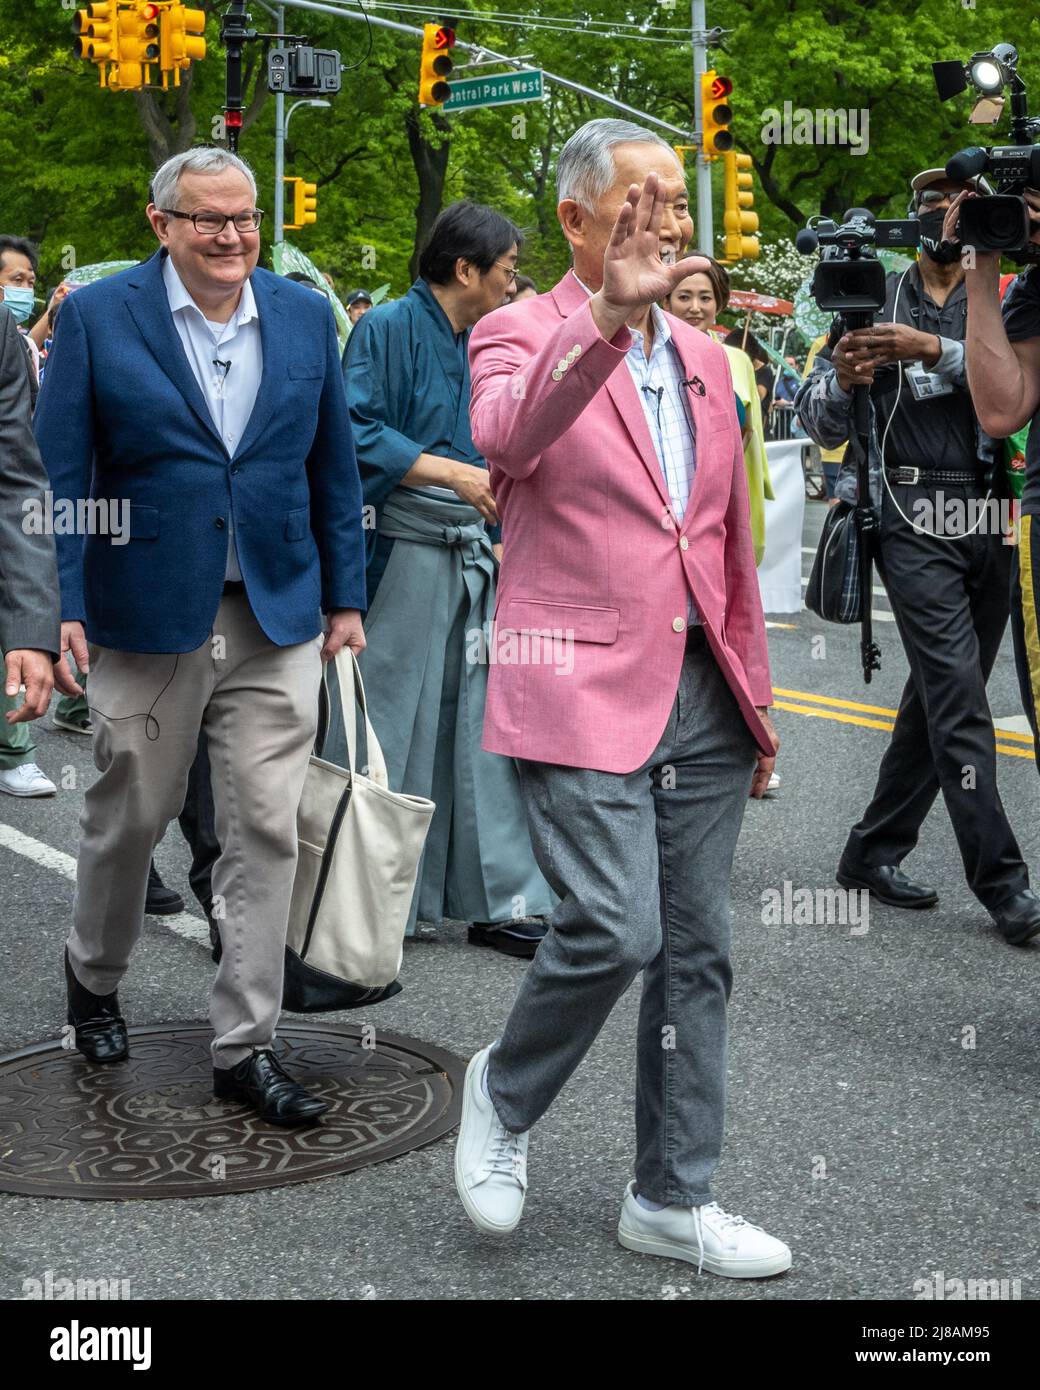 New York, USA. 14th May, 2022. Actor, activist and inaugural Grand Marshall George Takei wishes everybody 'Live Long and Prosper' as he walks ahead of husband Brad Altman (L) before participating in New York City's first Japan Day Parade. Credit: Enrique Shore/Alamy Live News Stock Photo